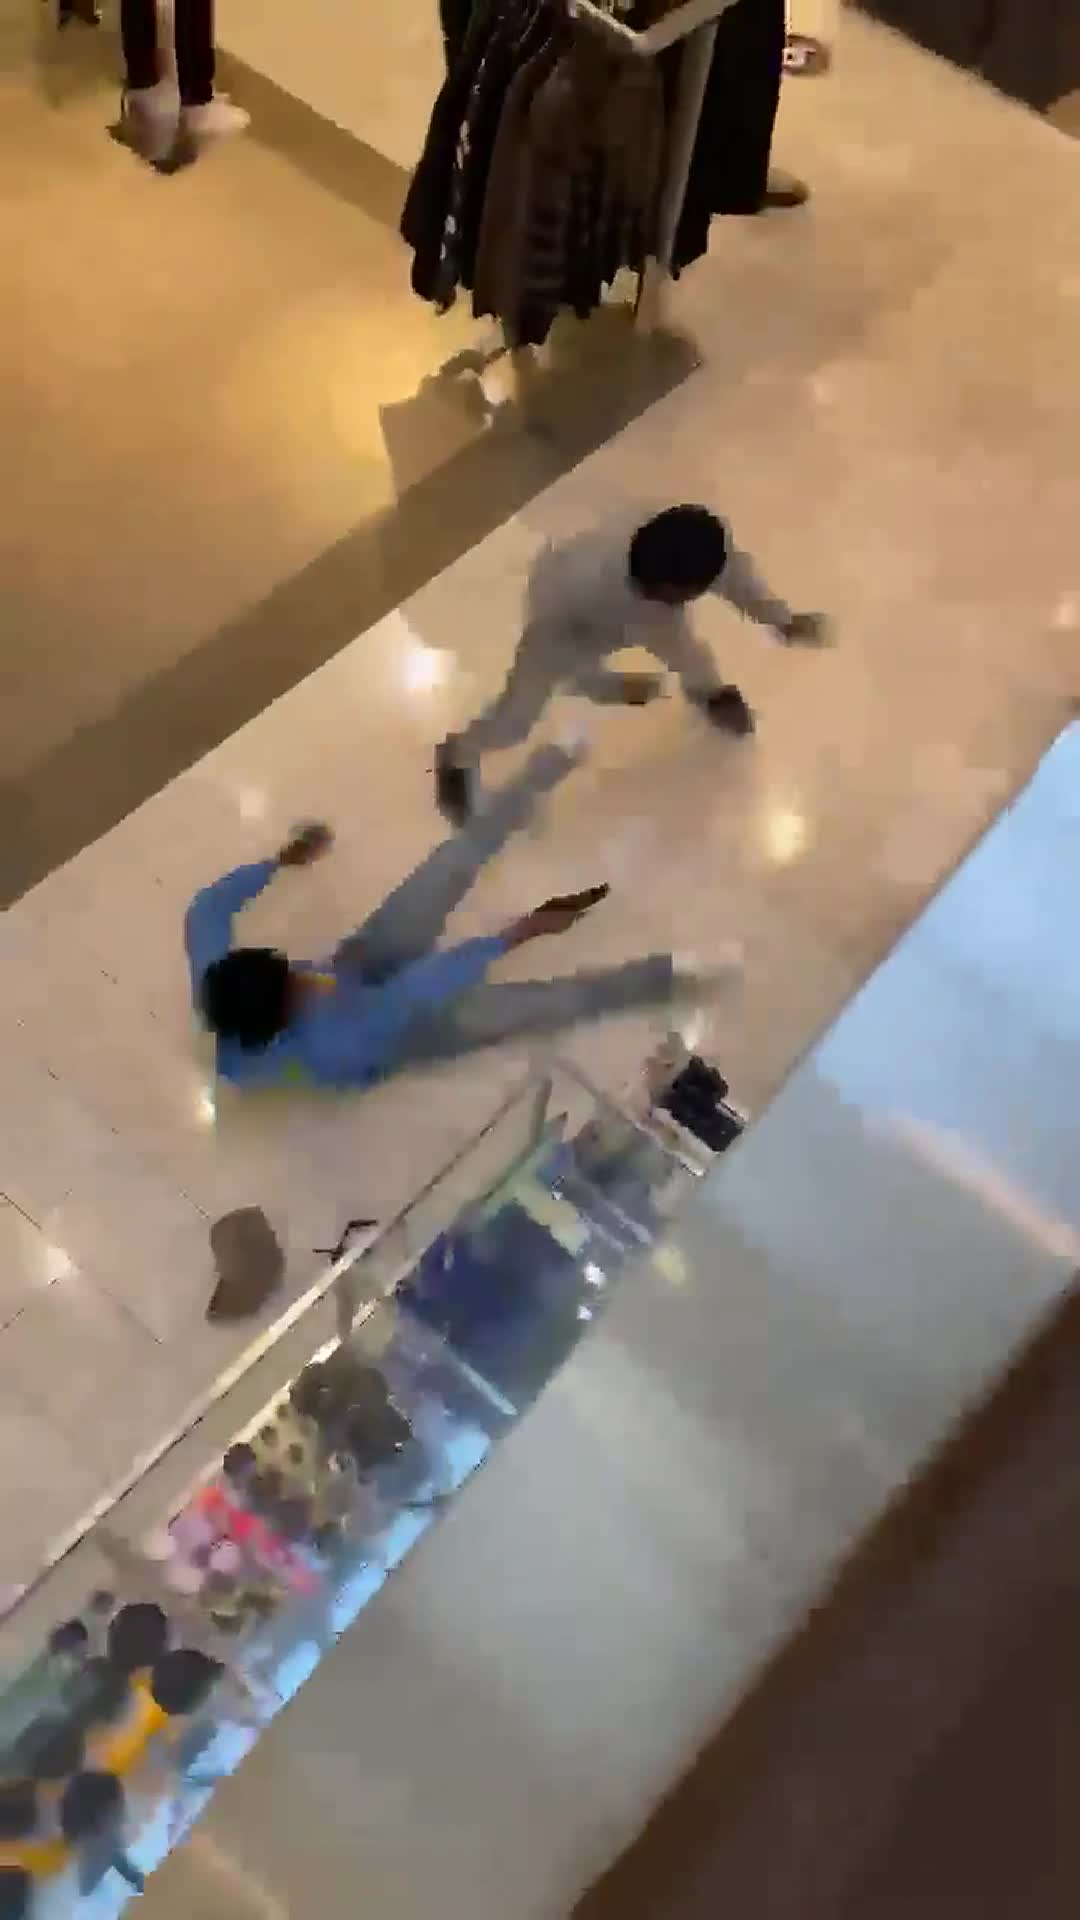 New video shows man open fire in the middle of Neiman Marcus to